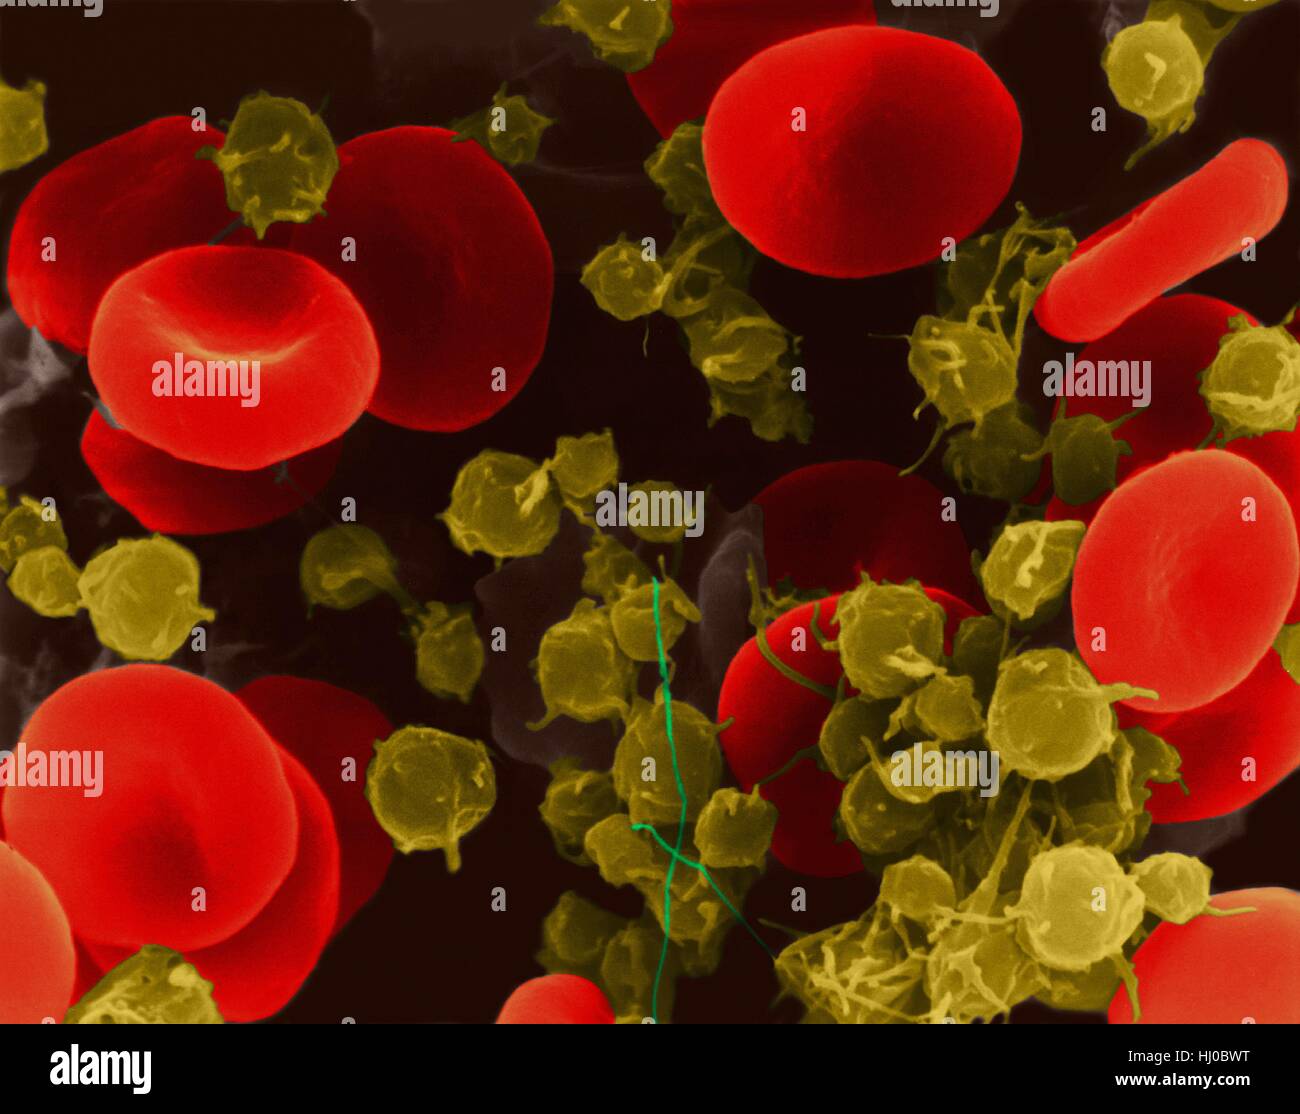 Human red blood cells platelets,coloured scanning electron micrograph  (SEM).Human red blood cells (RBCs),or erythrocytes,are involved in  delivering oxygen to body tissue.The cytoplasm of RBCs is rich in  haemoglobin,an iron-containing biomolecule that can